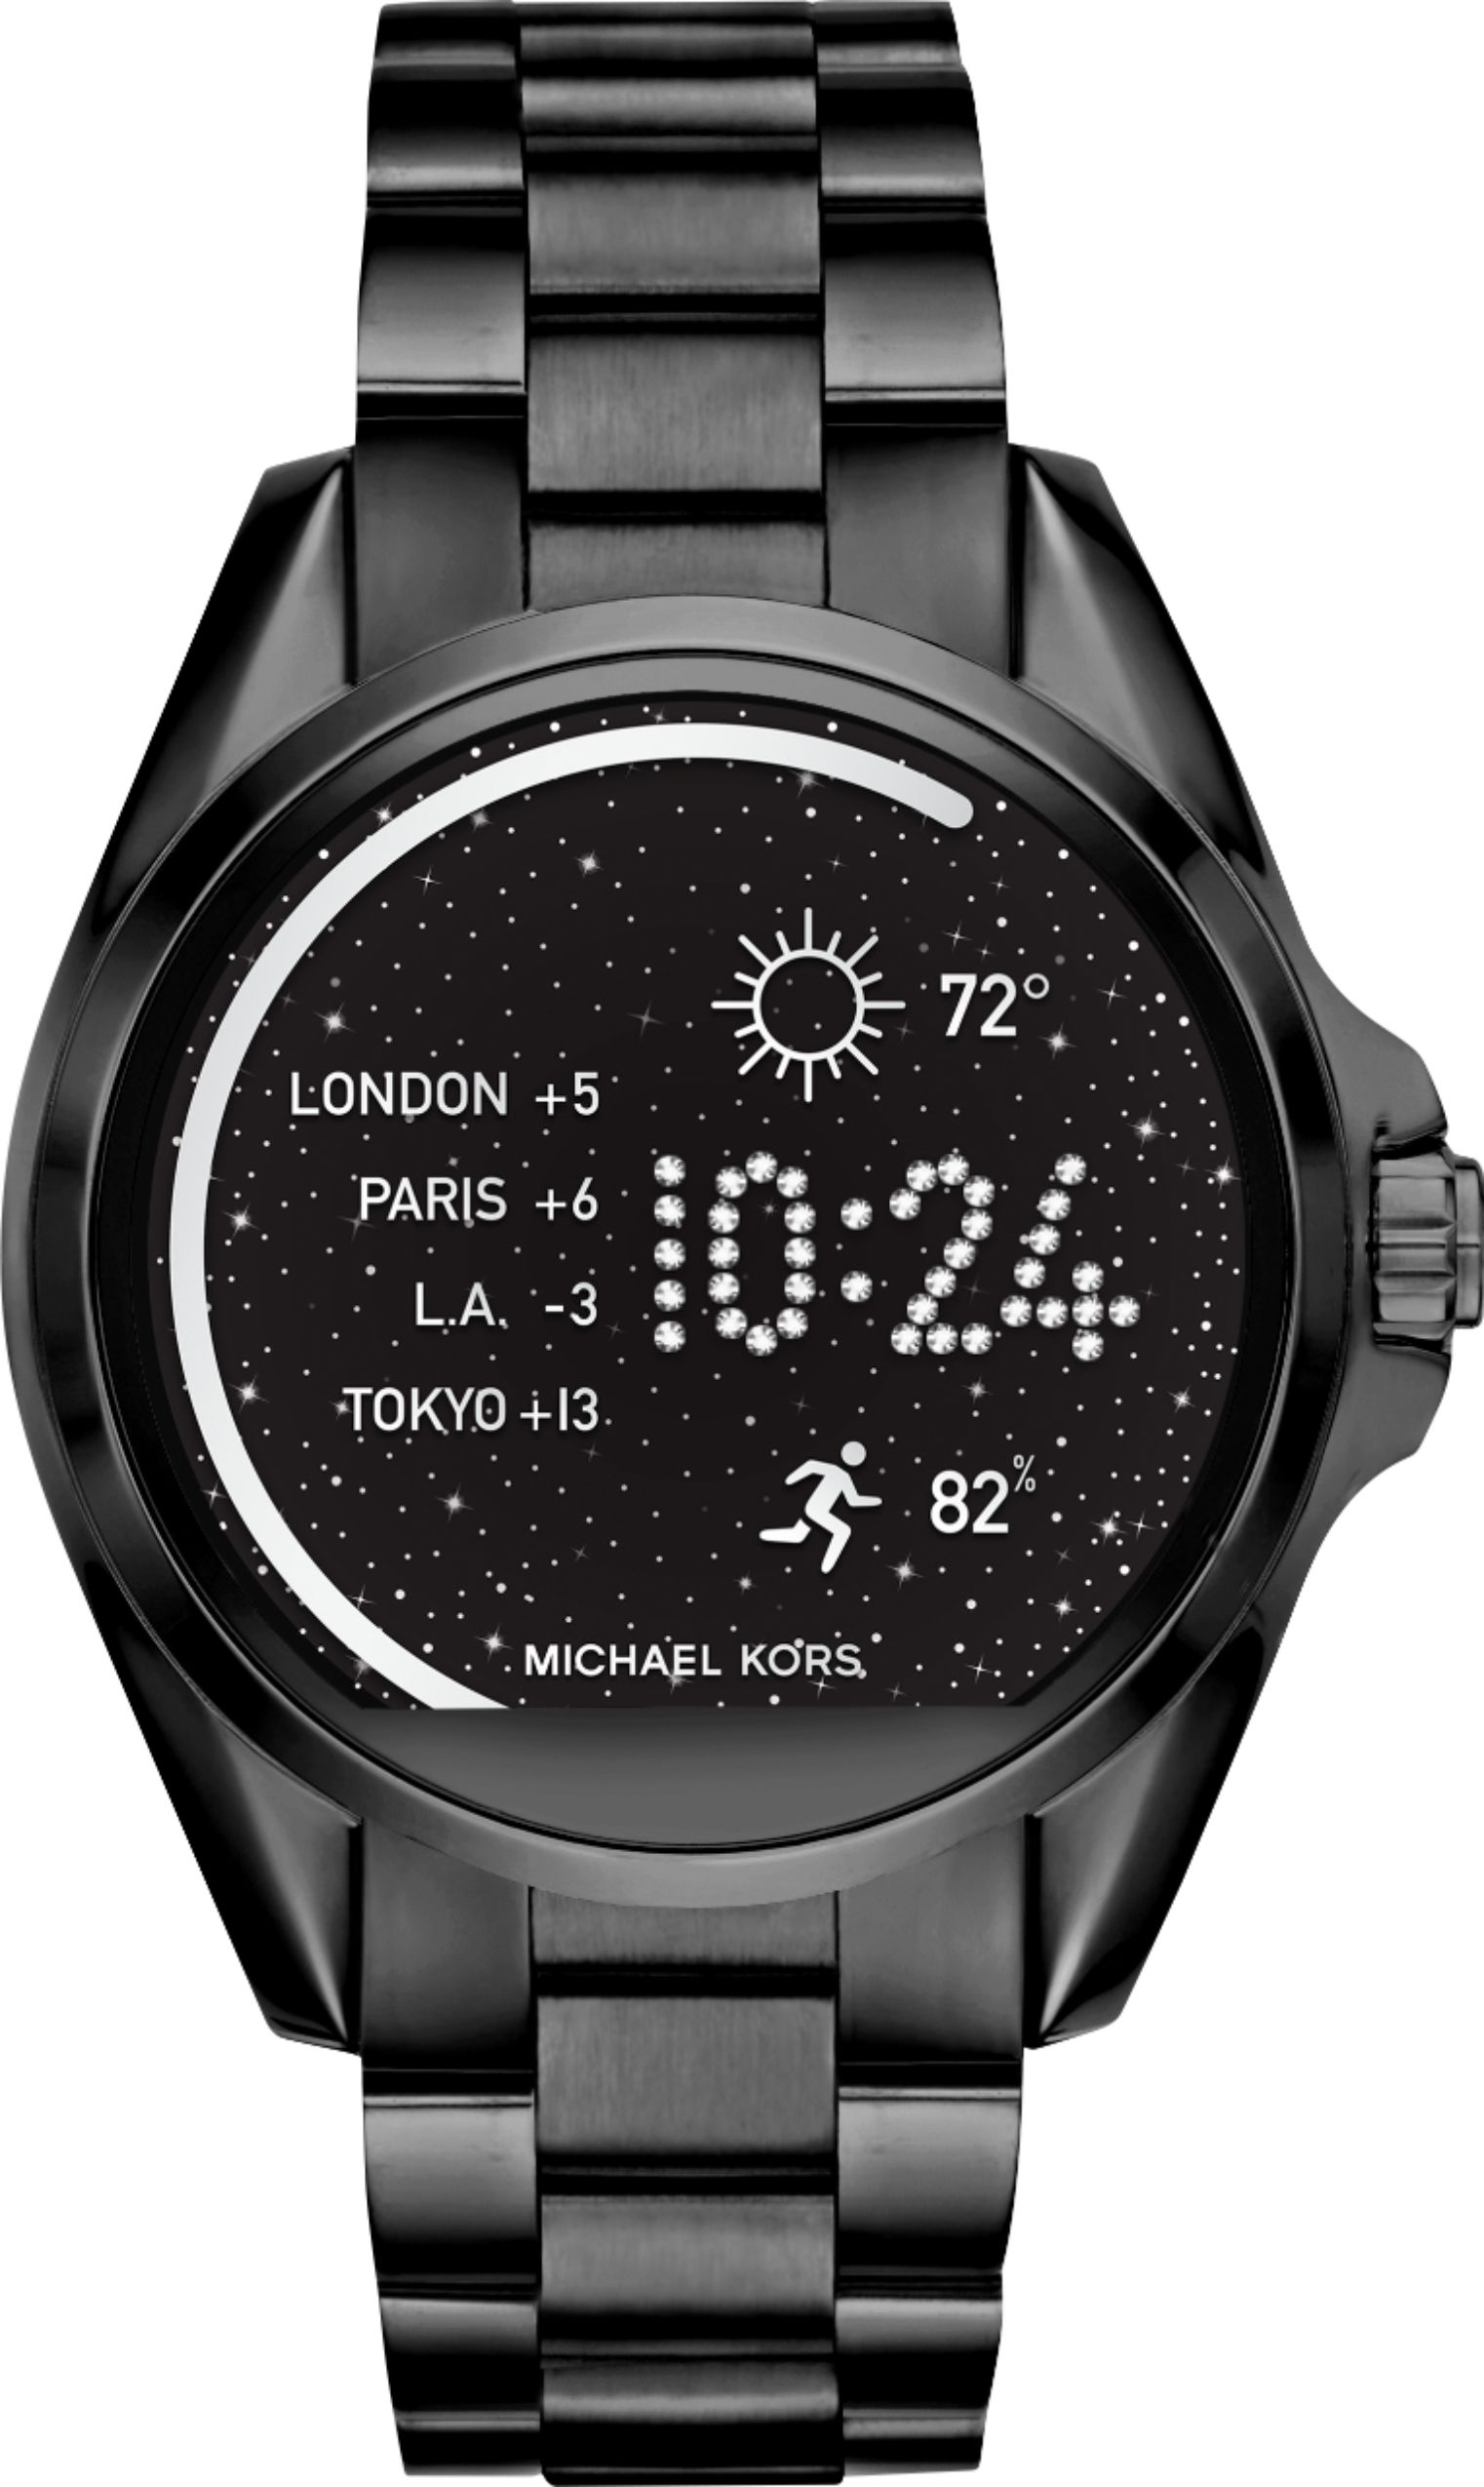 michael kors android watch best buy